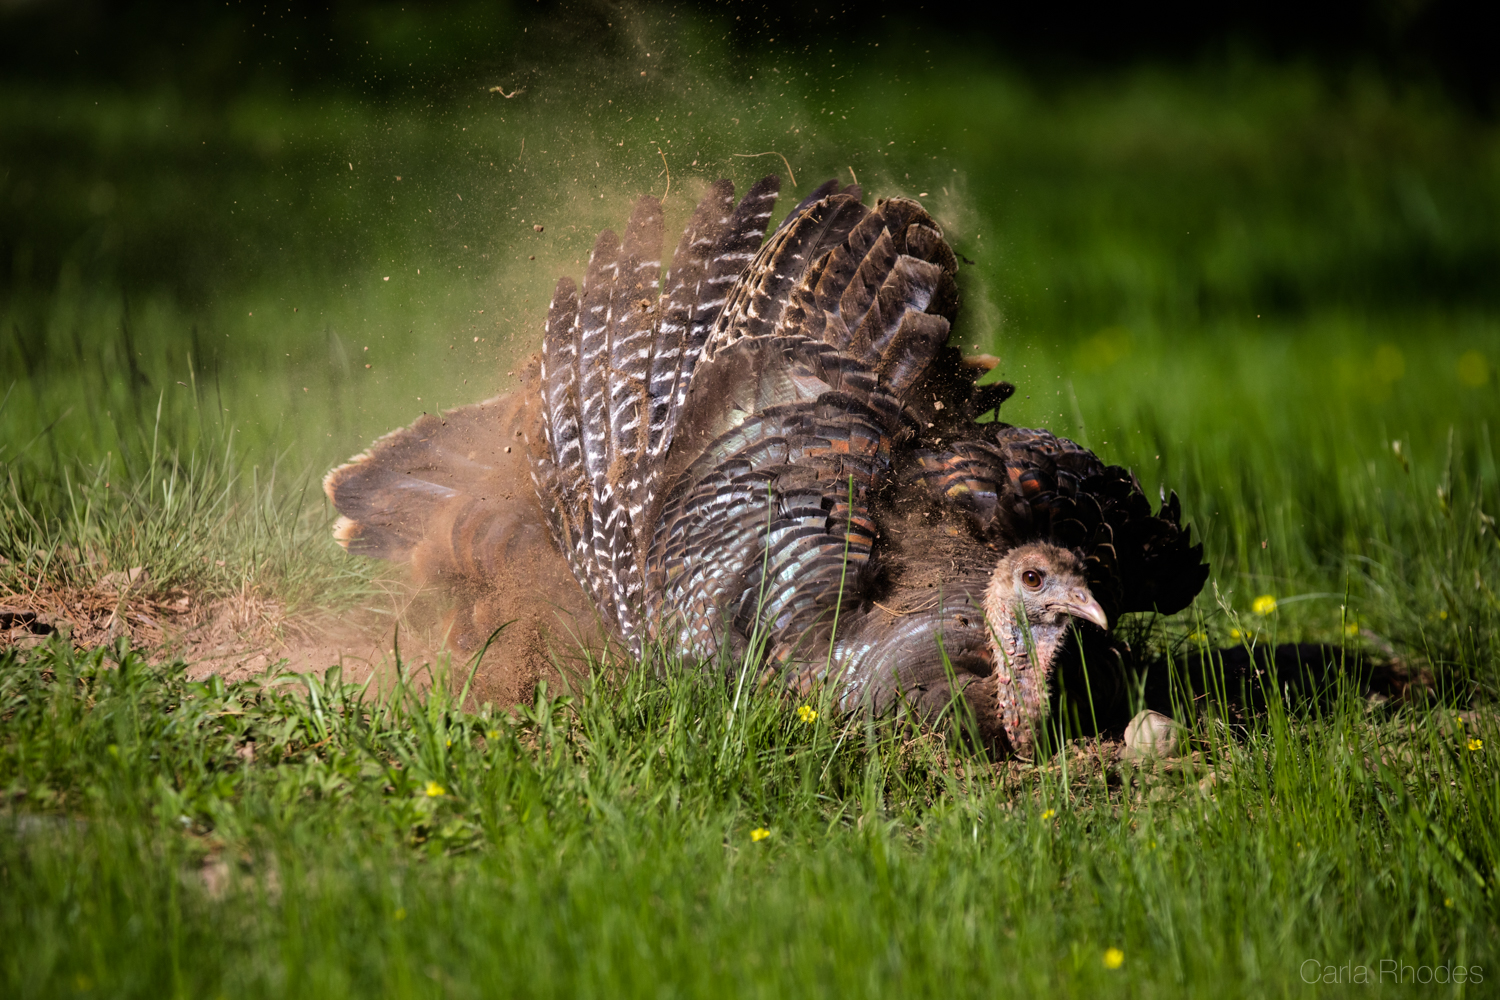 A Wild Turkey takes a “dust bath” (a practice thought to discourage insect parasites). Wild Turkeys breed in Pelham Bay Park. Photo: Carla Rhodes